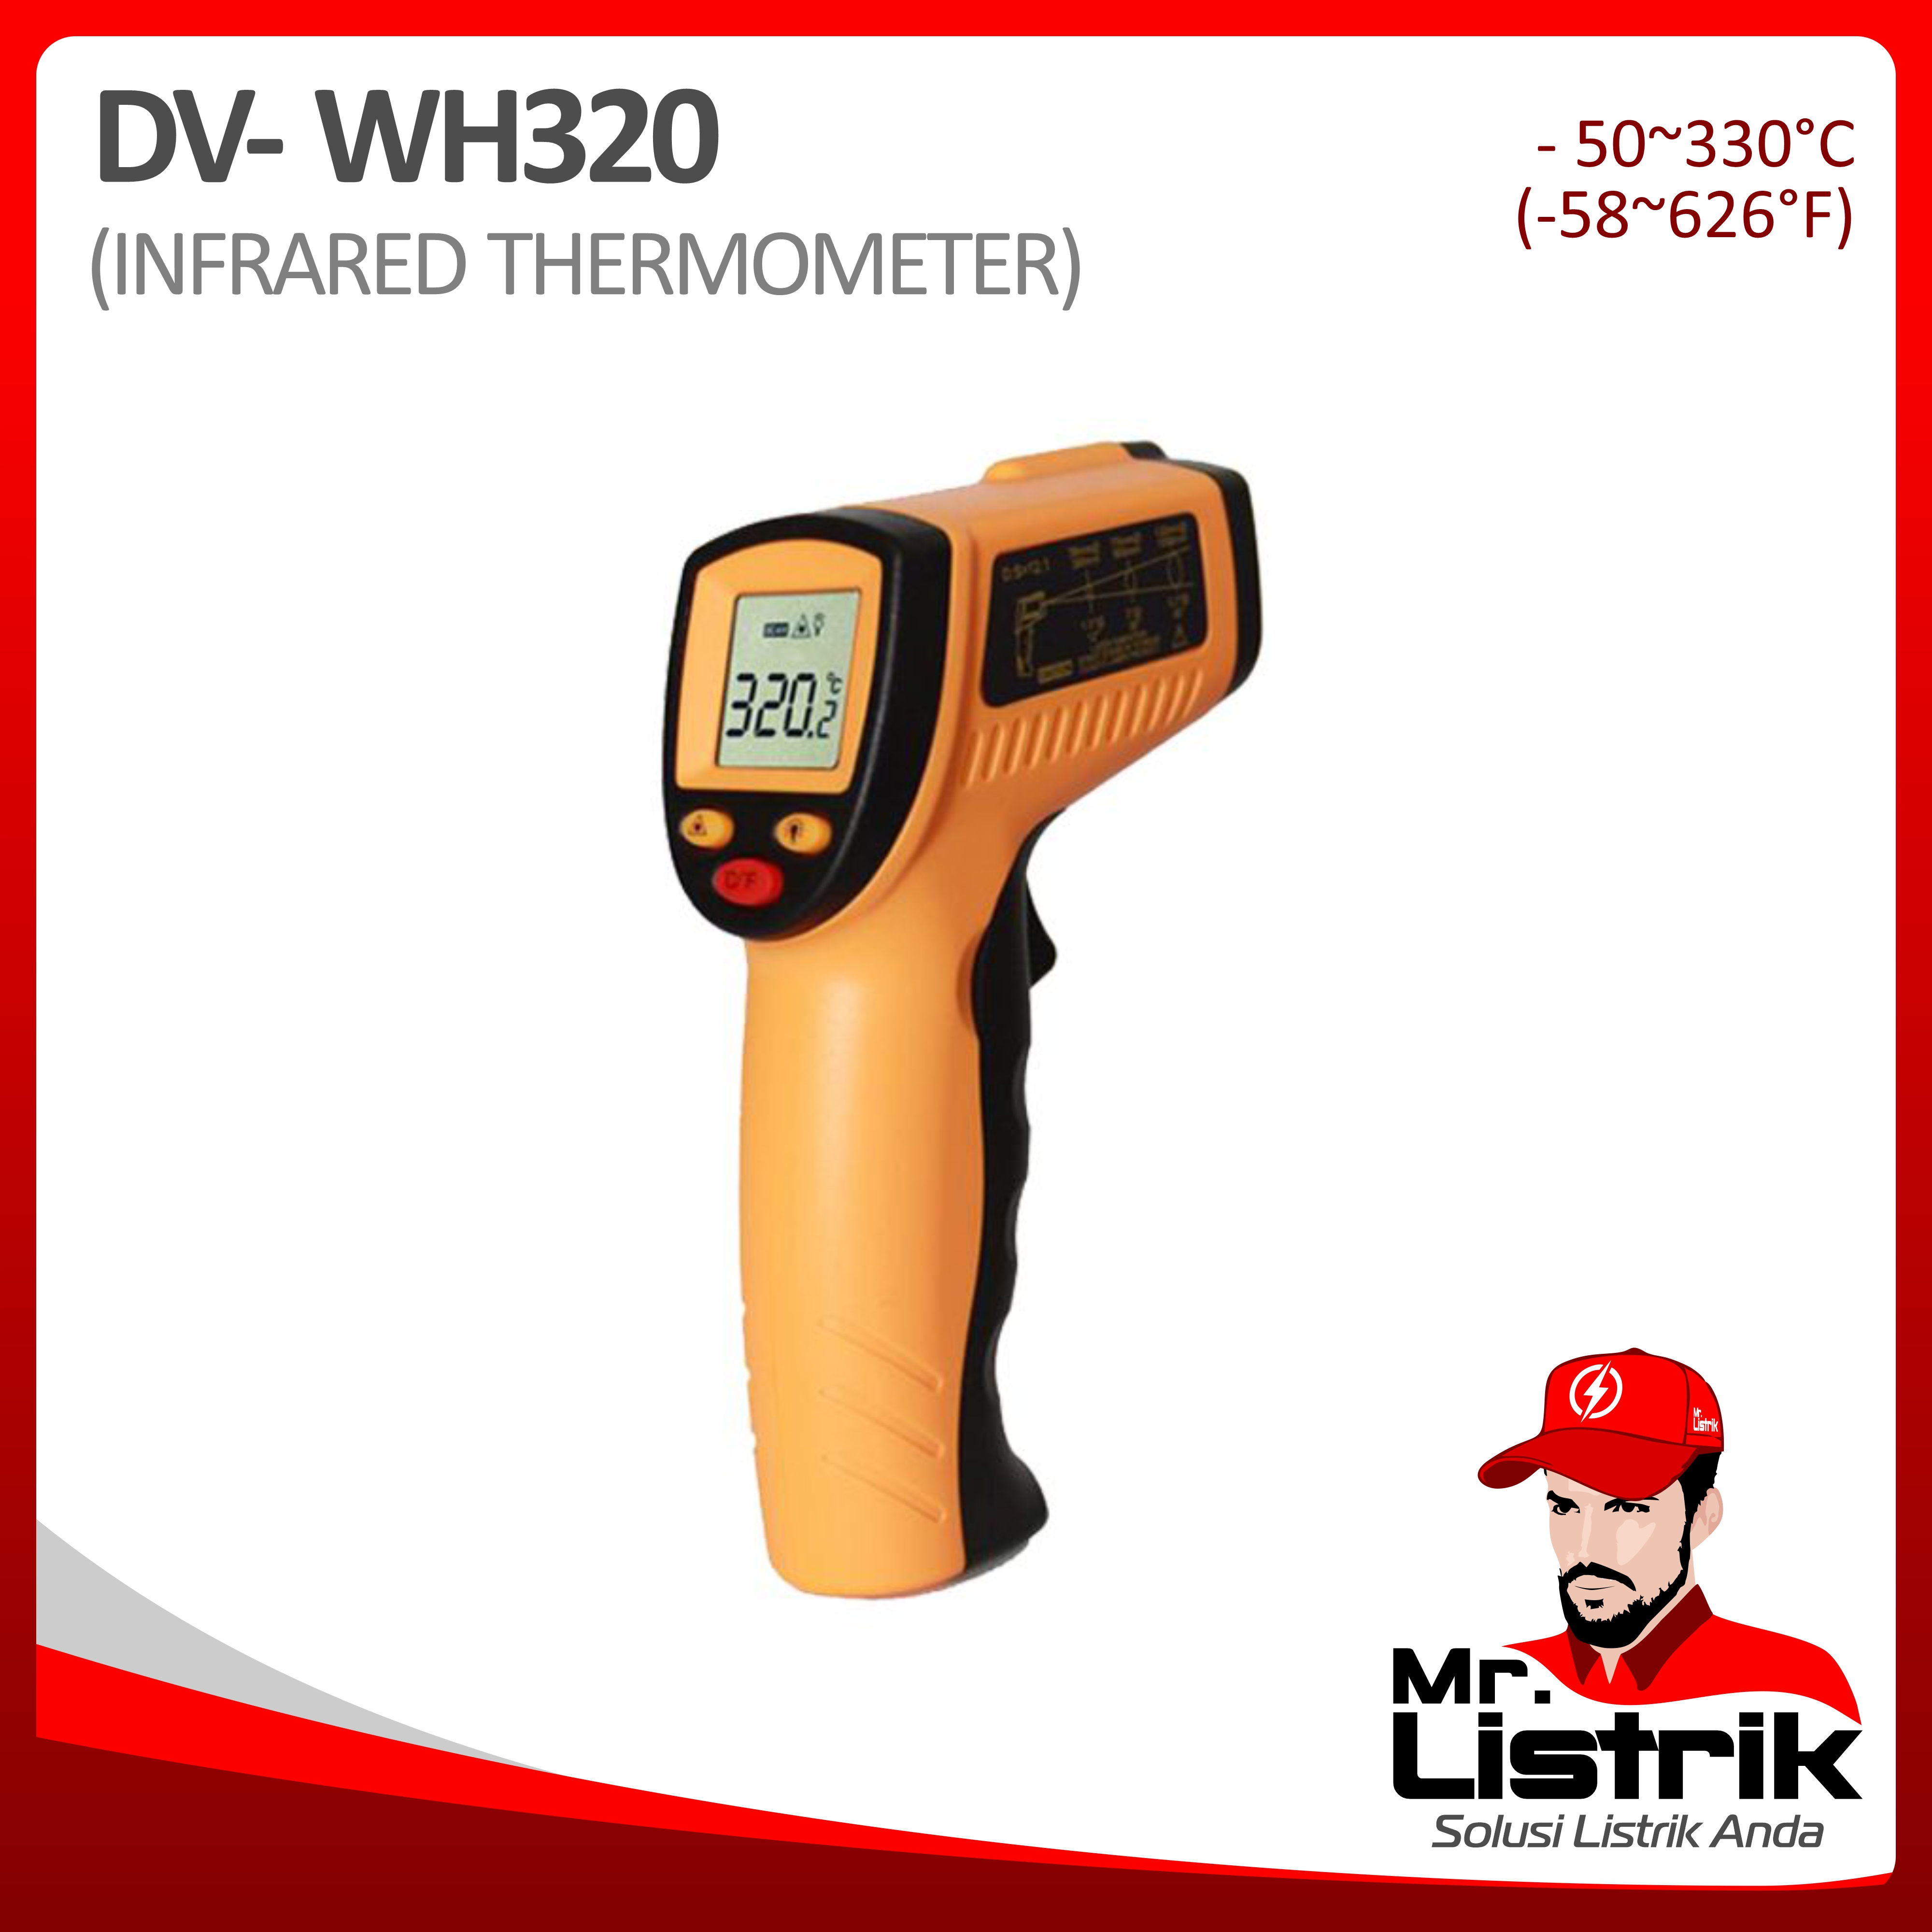 Infra Red Thermometer 50-330 Celcius DV WH320